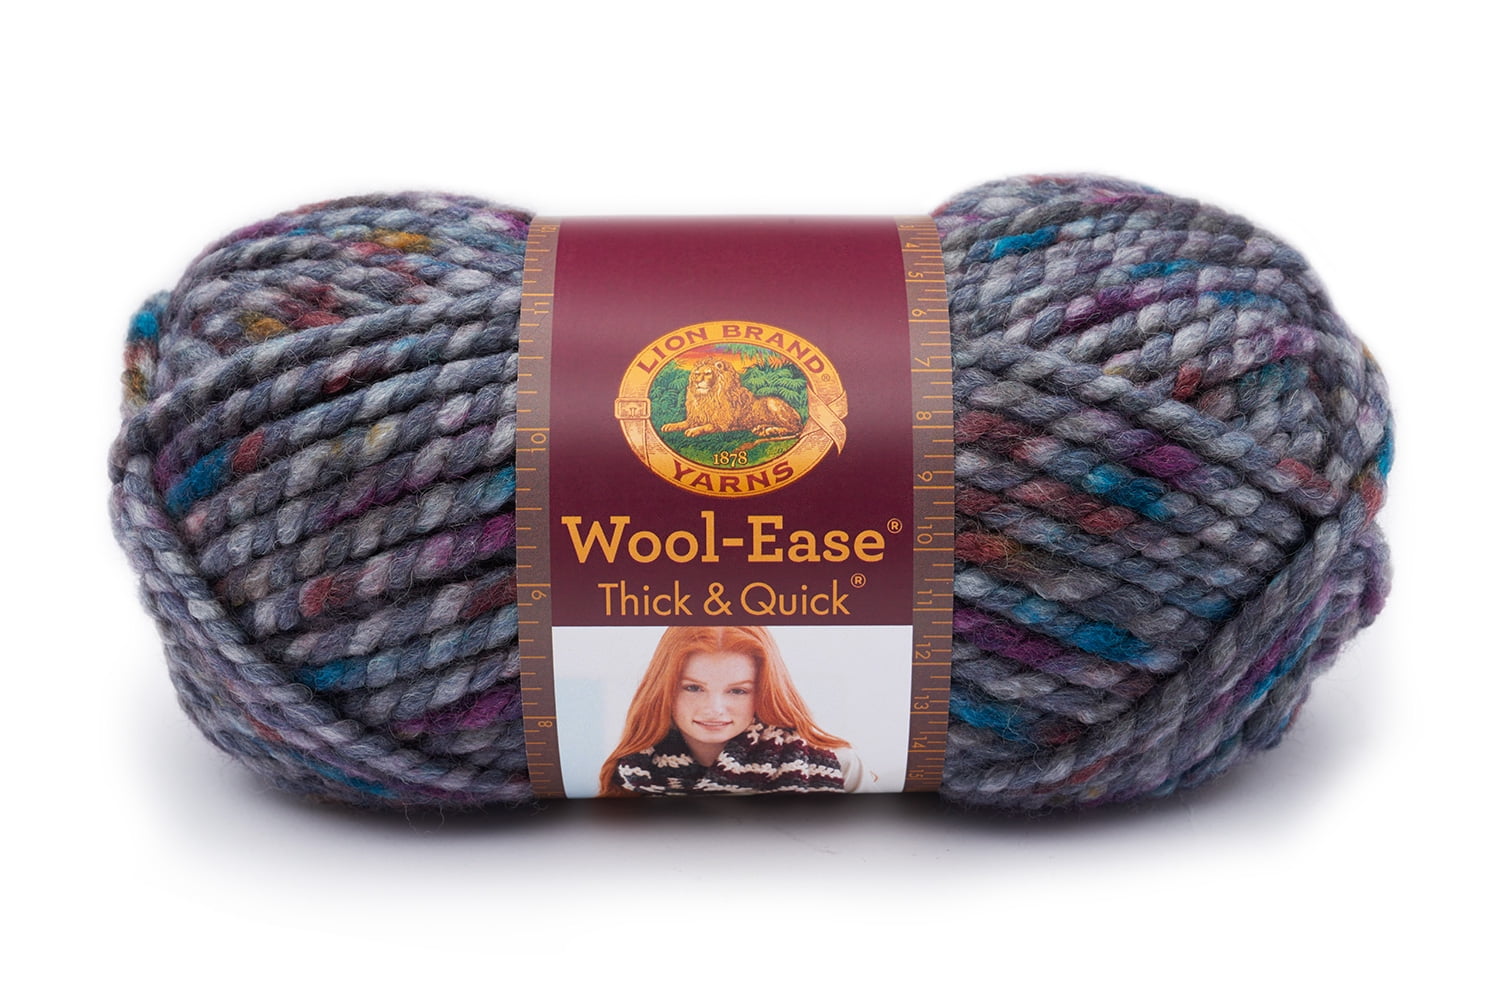 3 Pack) Lion Brand Wool-ease Thick & Quick Yarn - Barley : Target